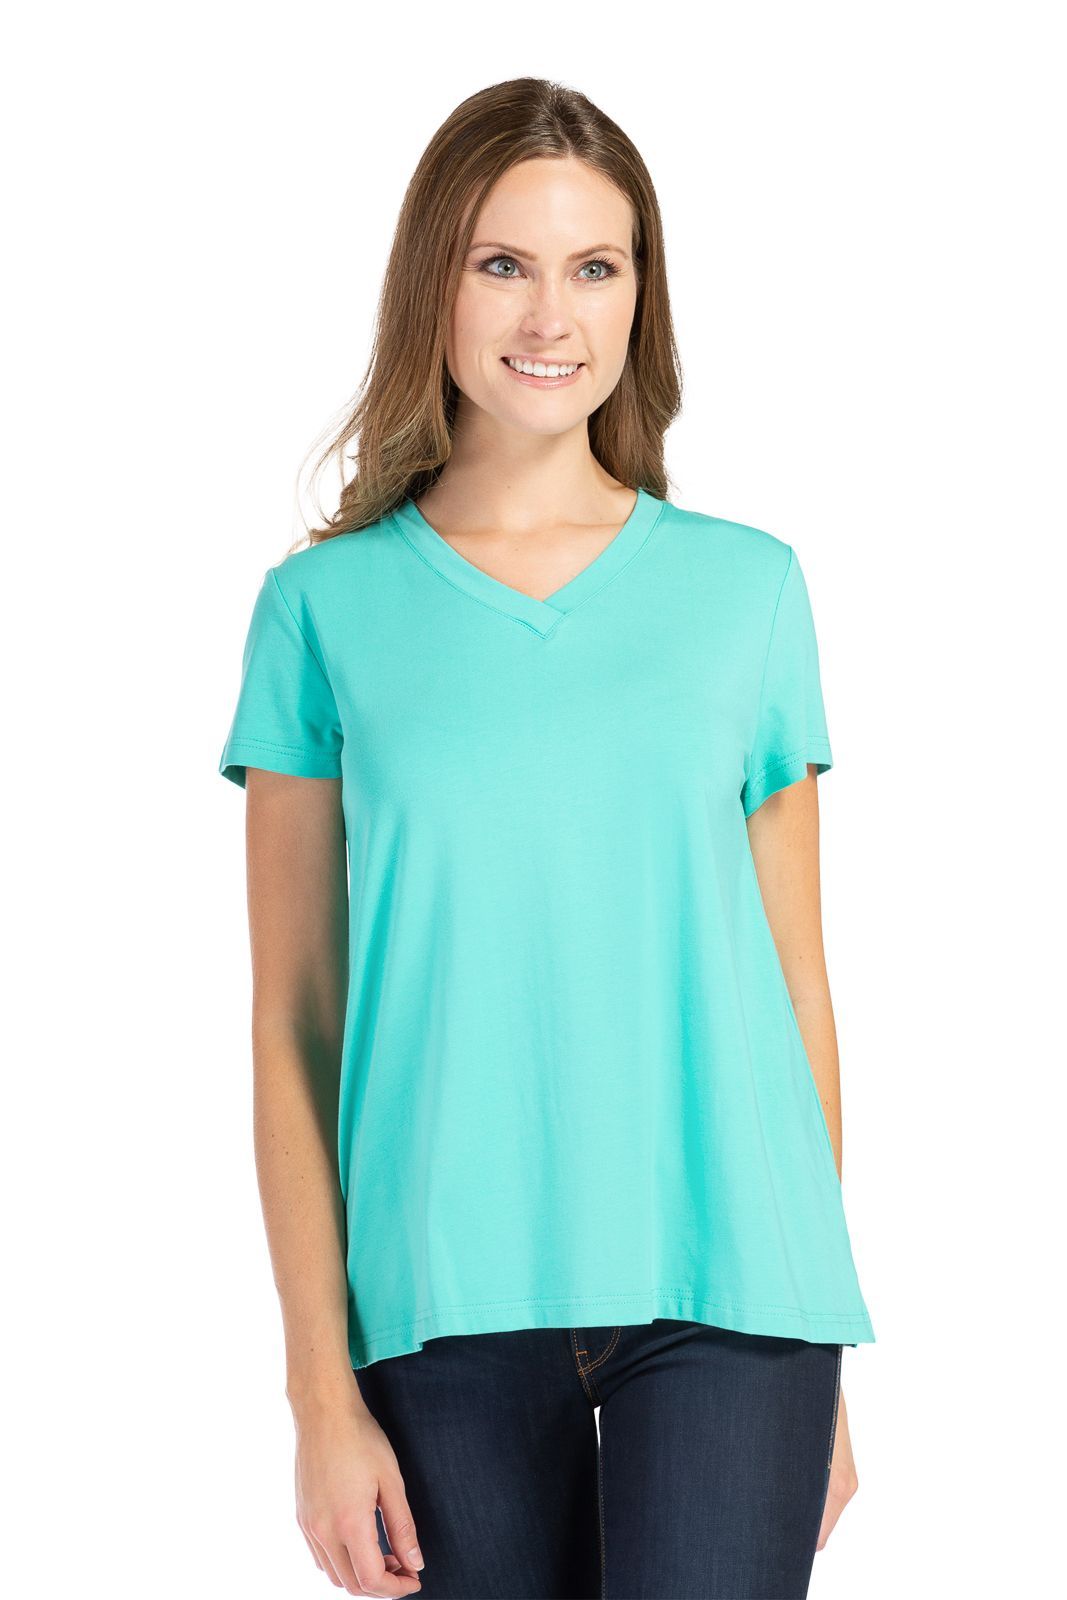 Fishers Finery Women's Ecofabric Short Sleeve Classic Fit V Neck